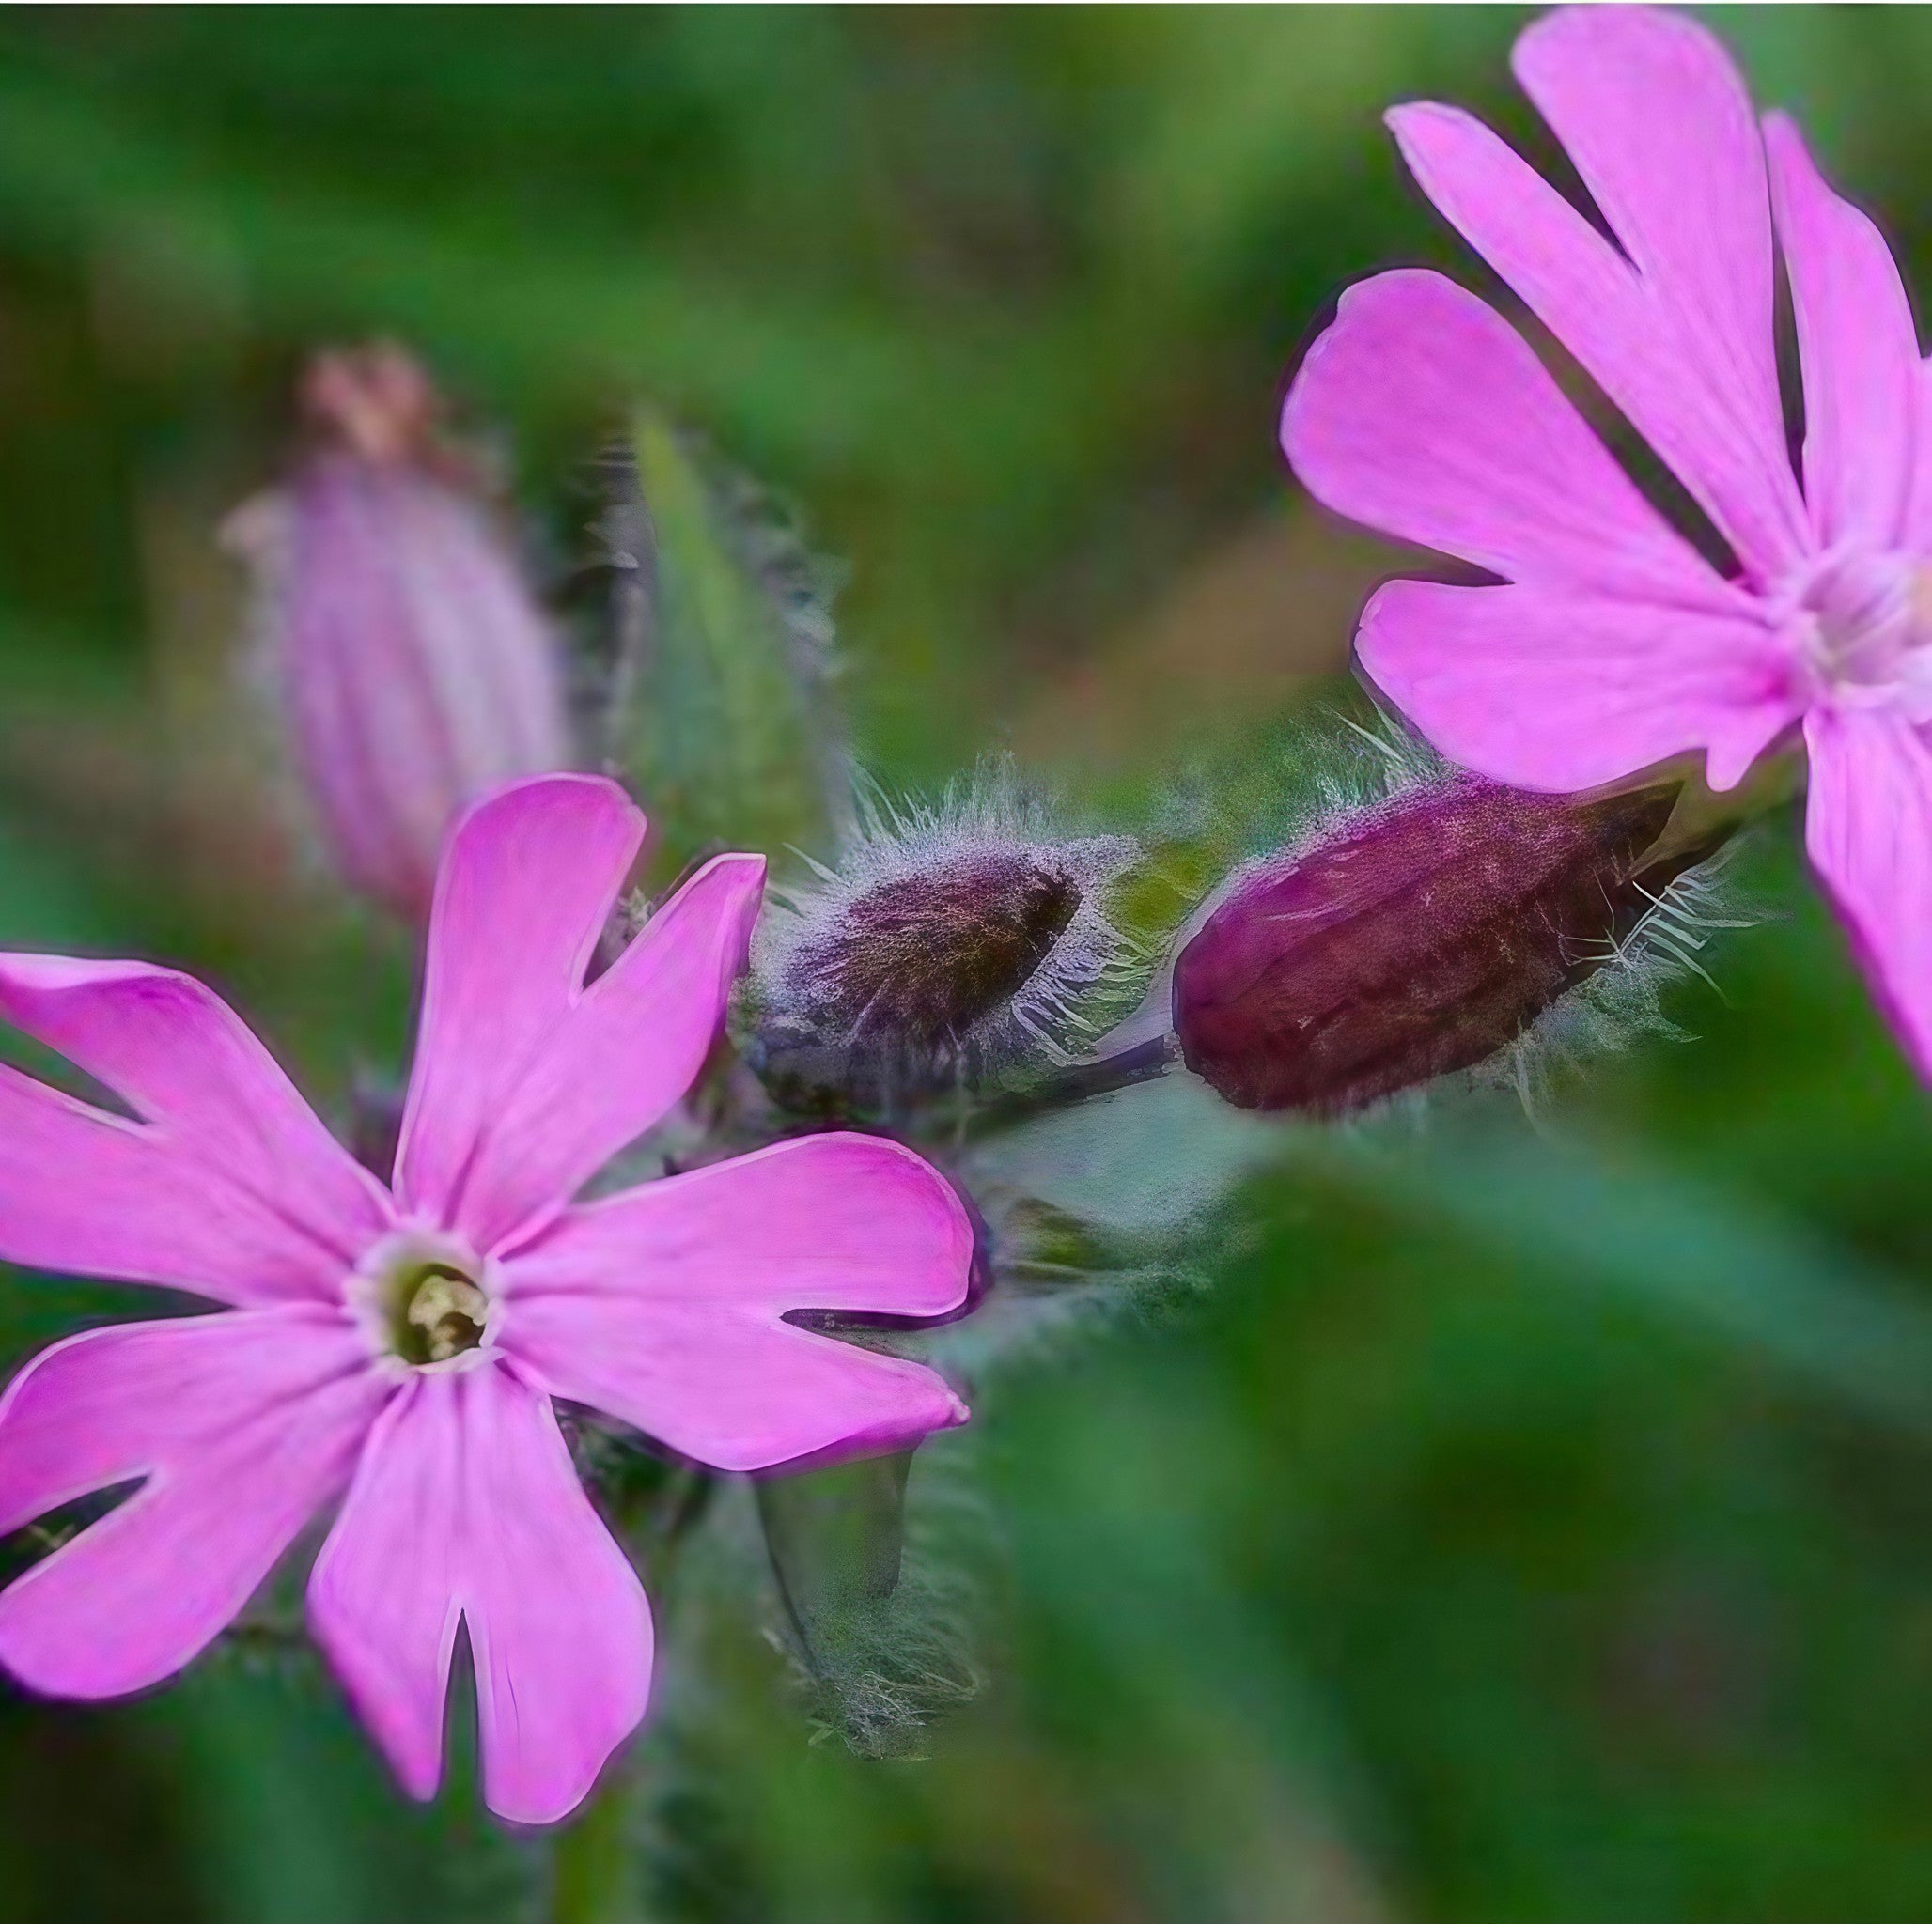 Pair of Red Campion blossoms amid green grass